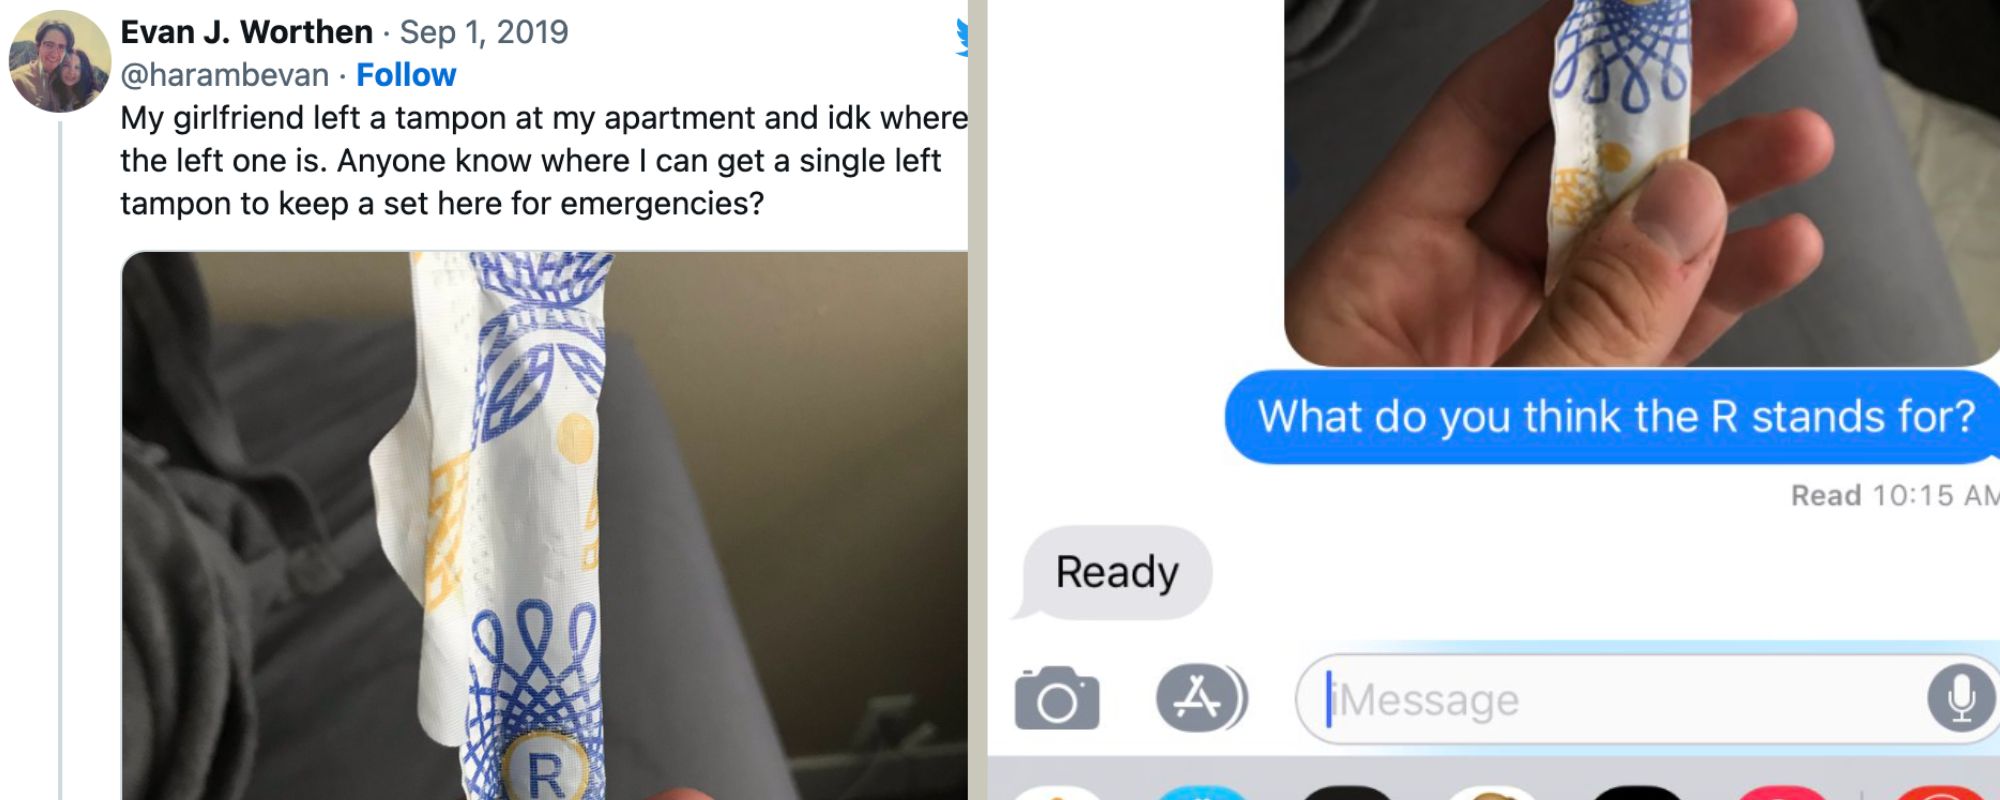 Women Are Asking Their Boyfriends What The Letters On Tampons Mean, And  Their Guesses Are Hilarious